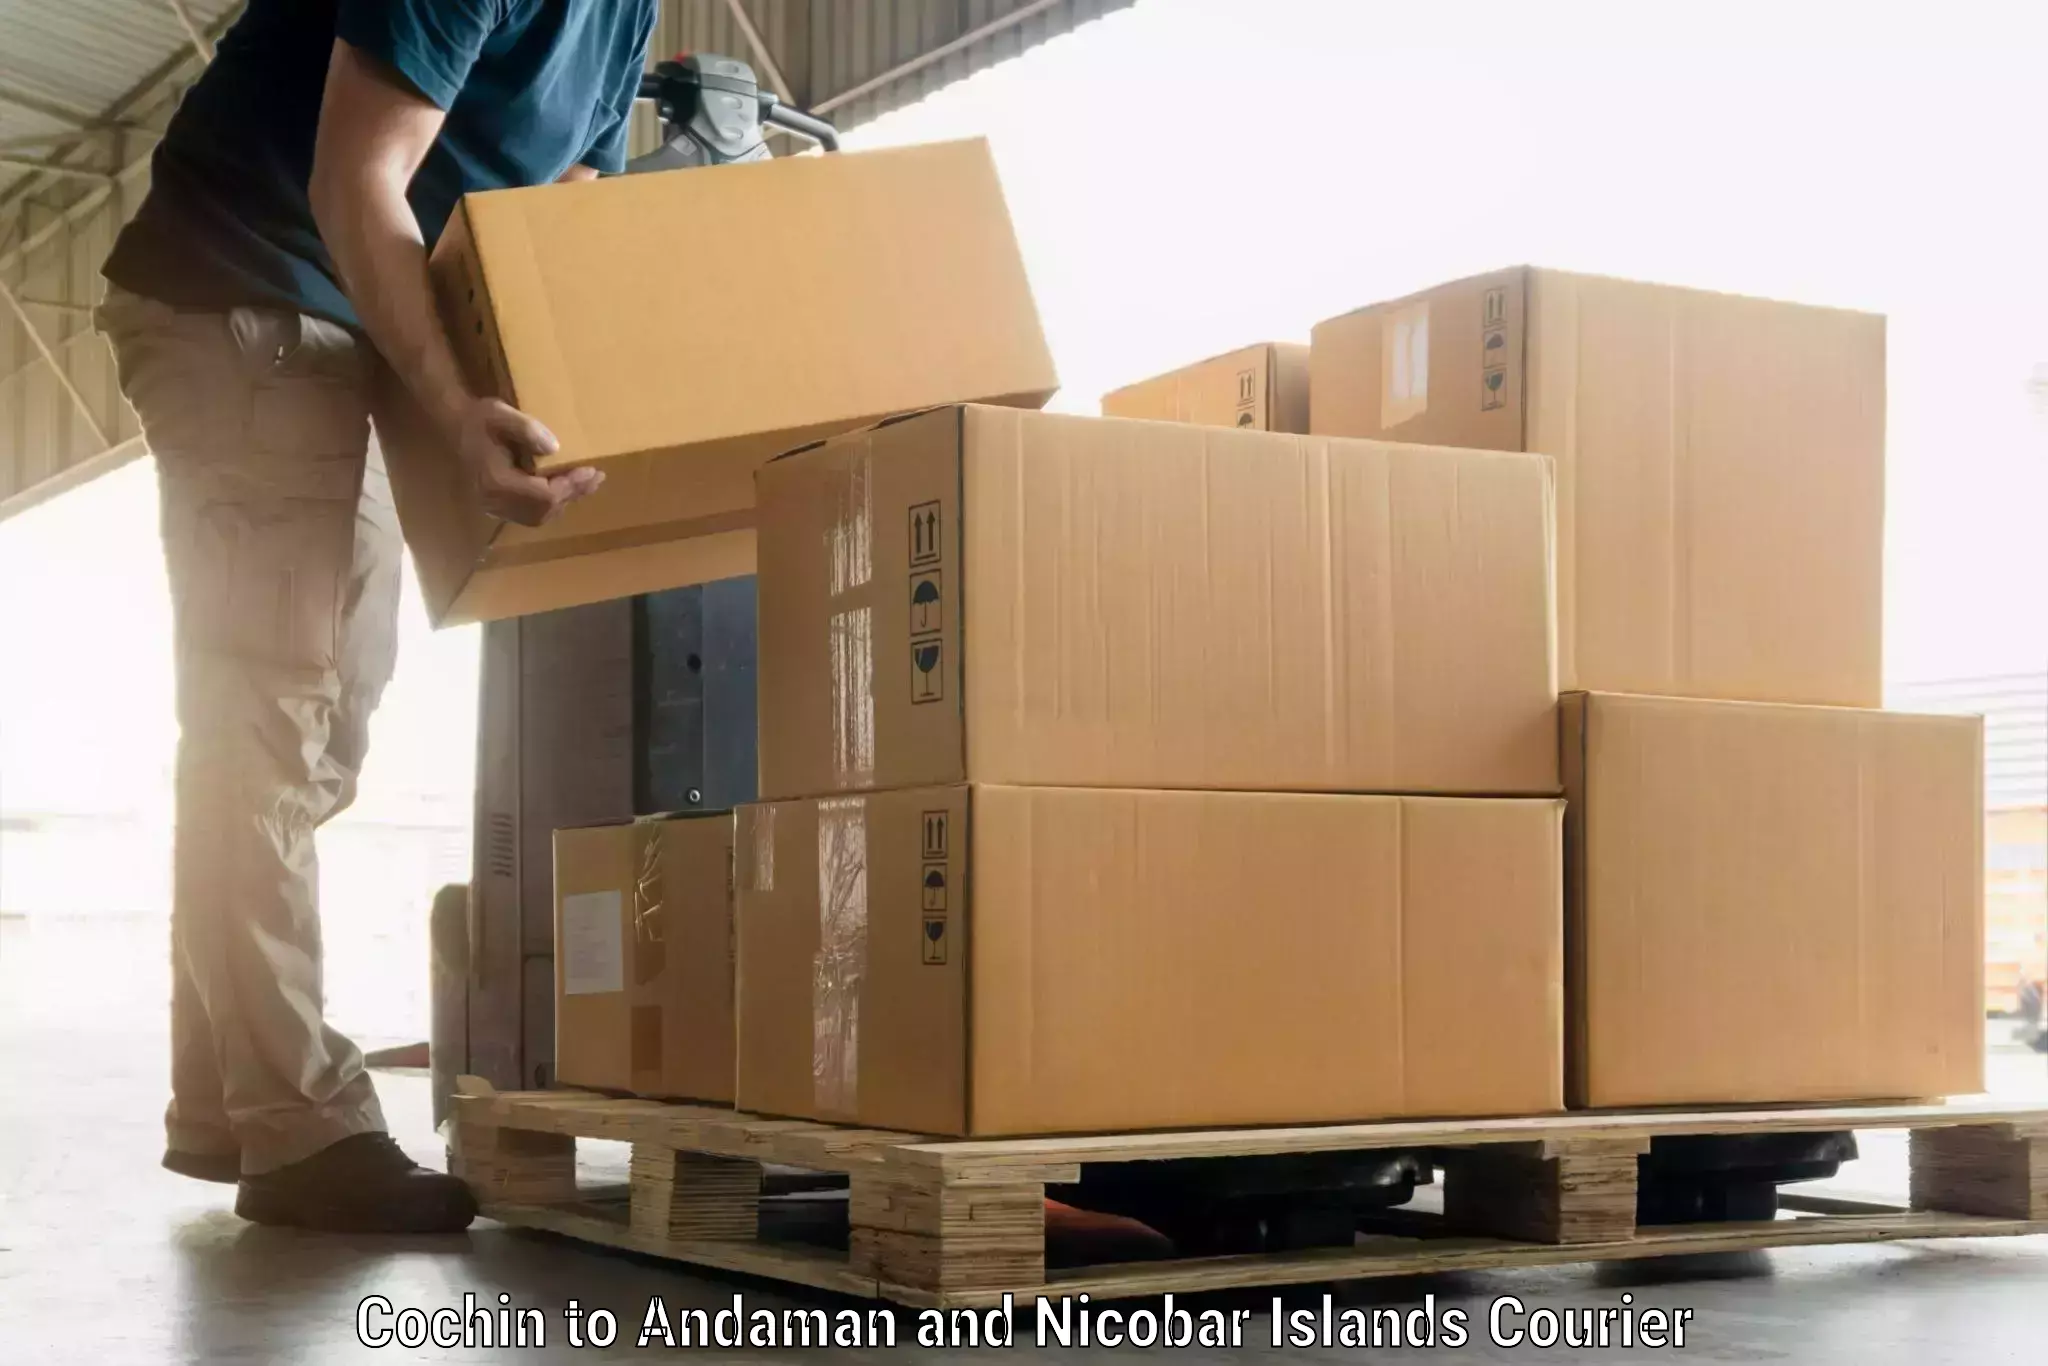 Luggage shipment specialists Cochin to Andaman and Nicobar Islands